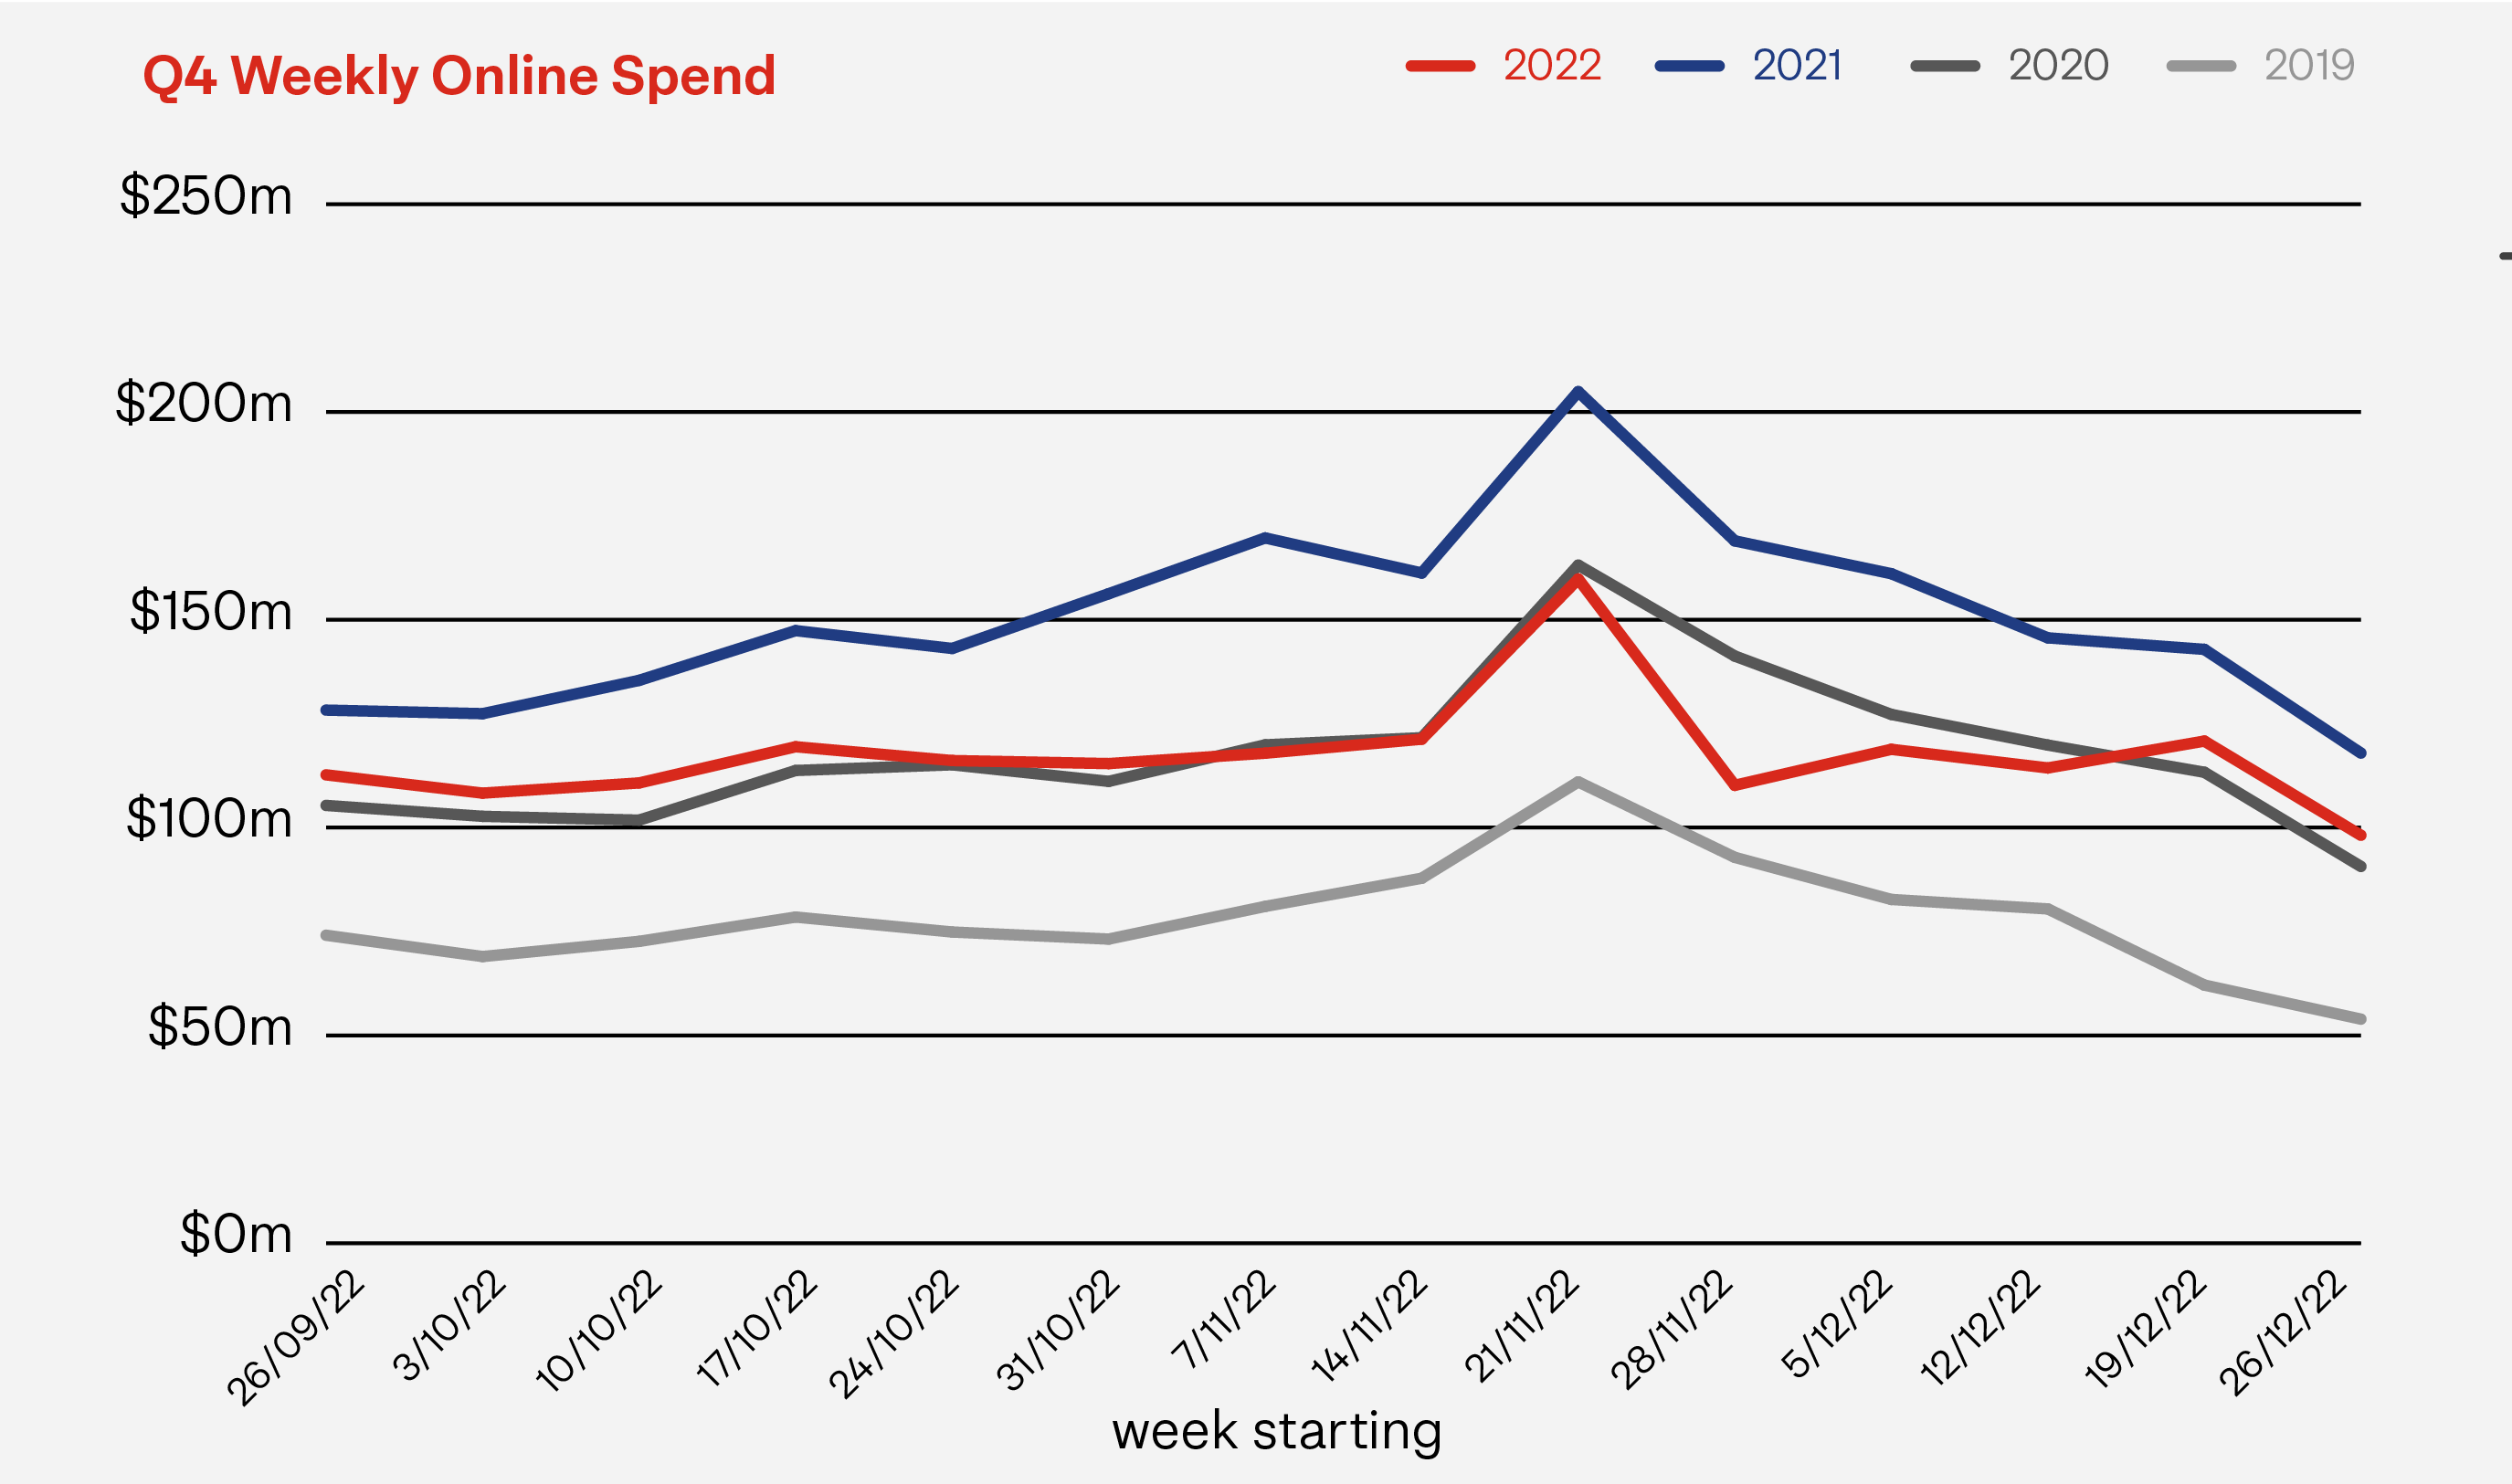 Line graph showing Q4 weekly online spend Sep 2019 to 2022